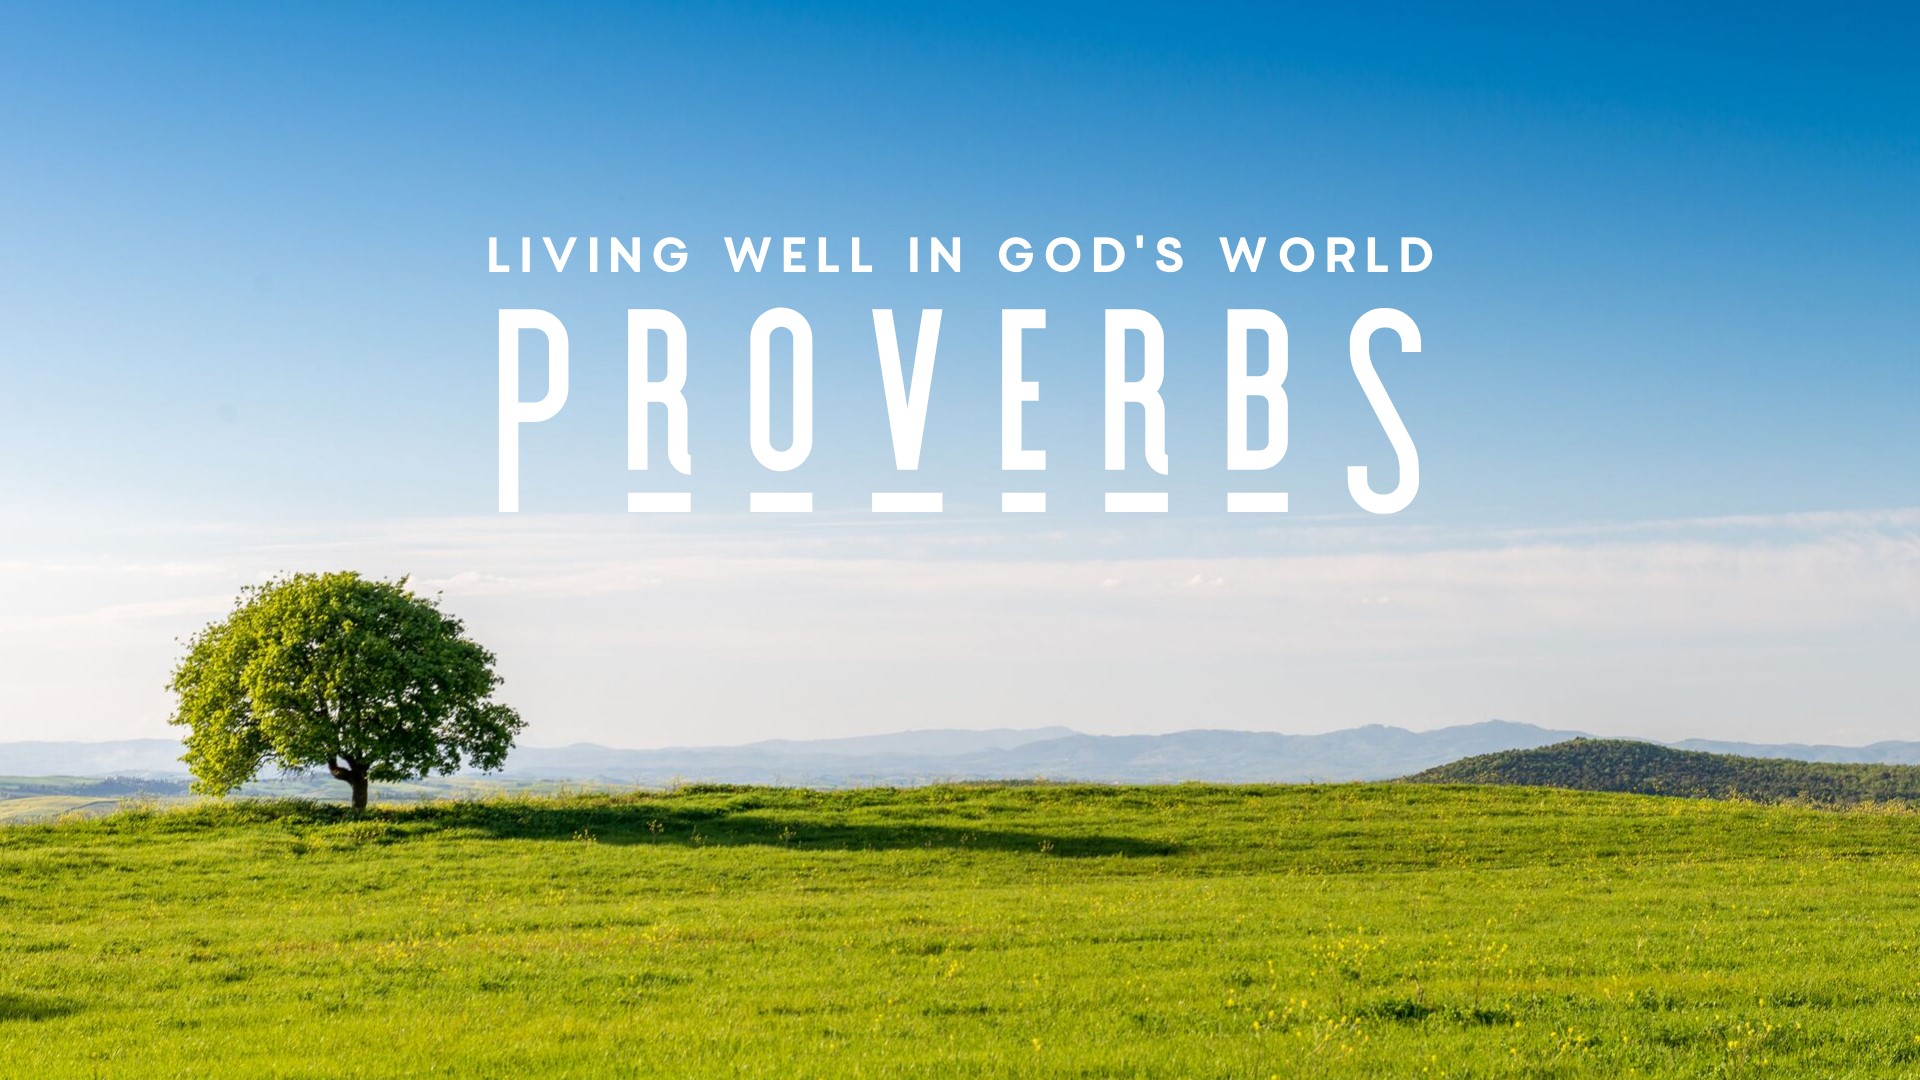 Proverbs – Living well in God’s world